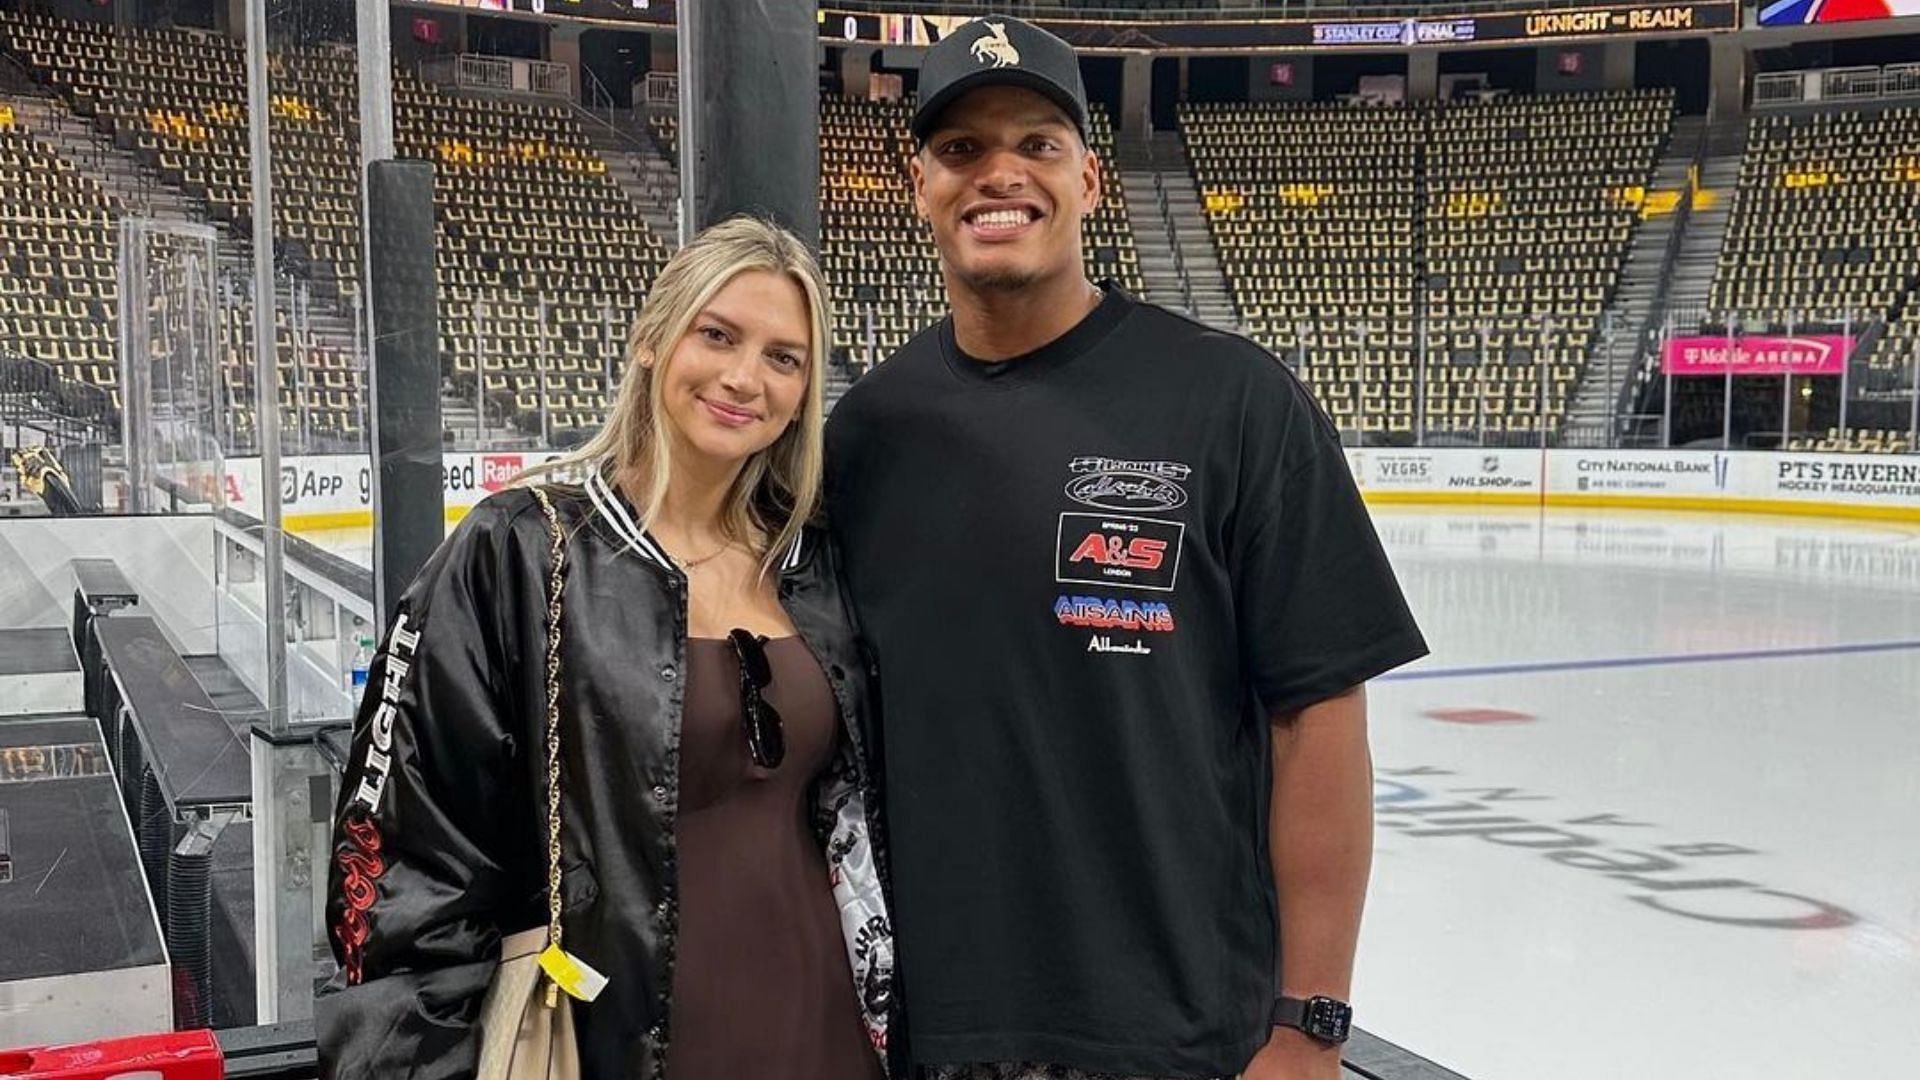 TikTok personality Allison Kuch with her husband, NFL defensive end Isaac Rochell, take a photo inside the T-Mobile Arena before a Vegas Golden Knights game. (Image credit: Allison Kuch on Instagram)